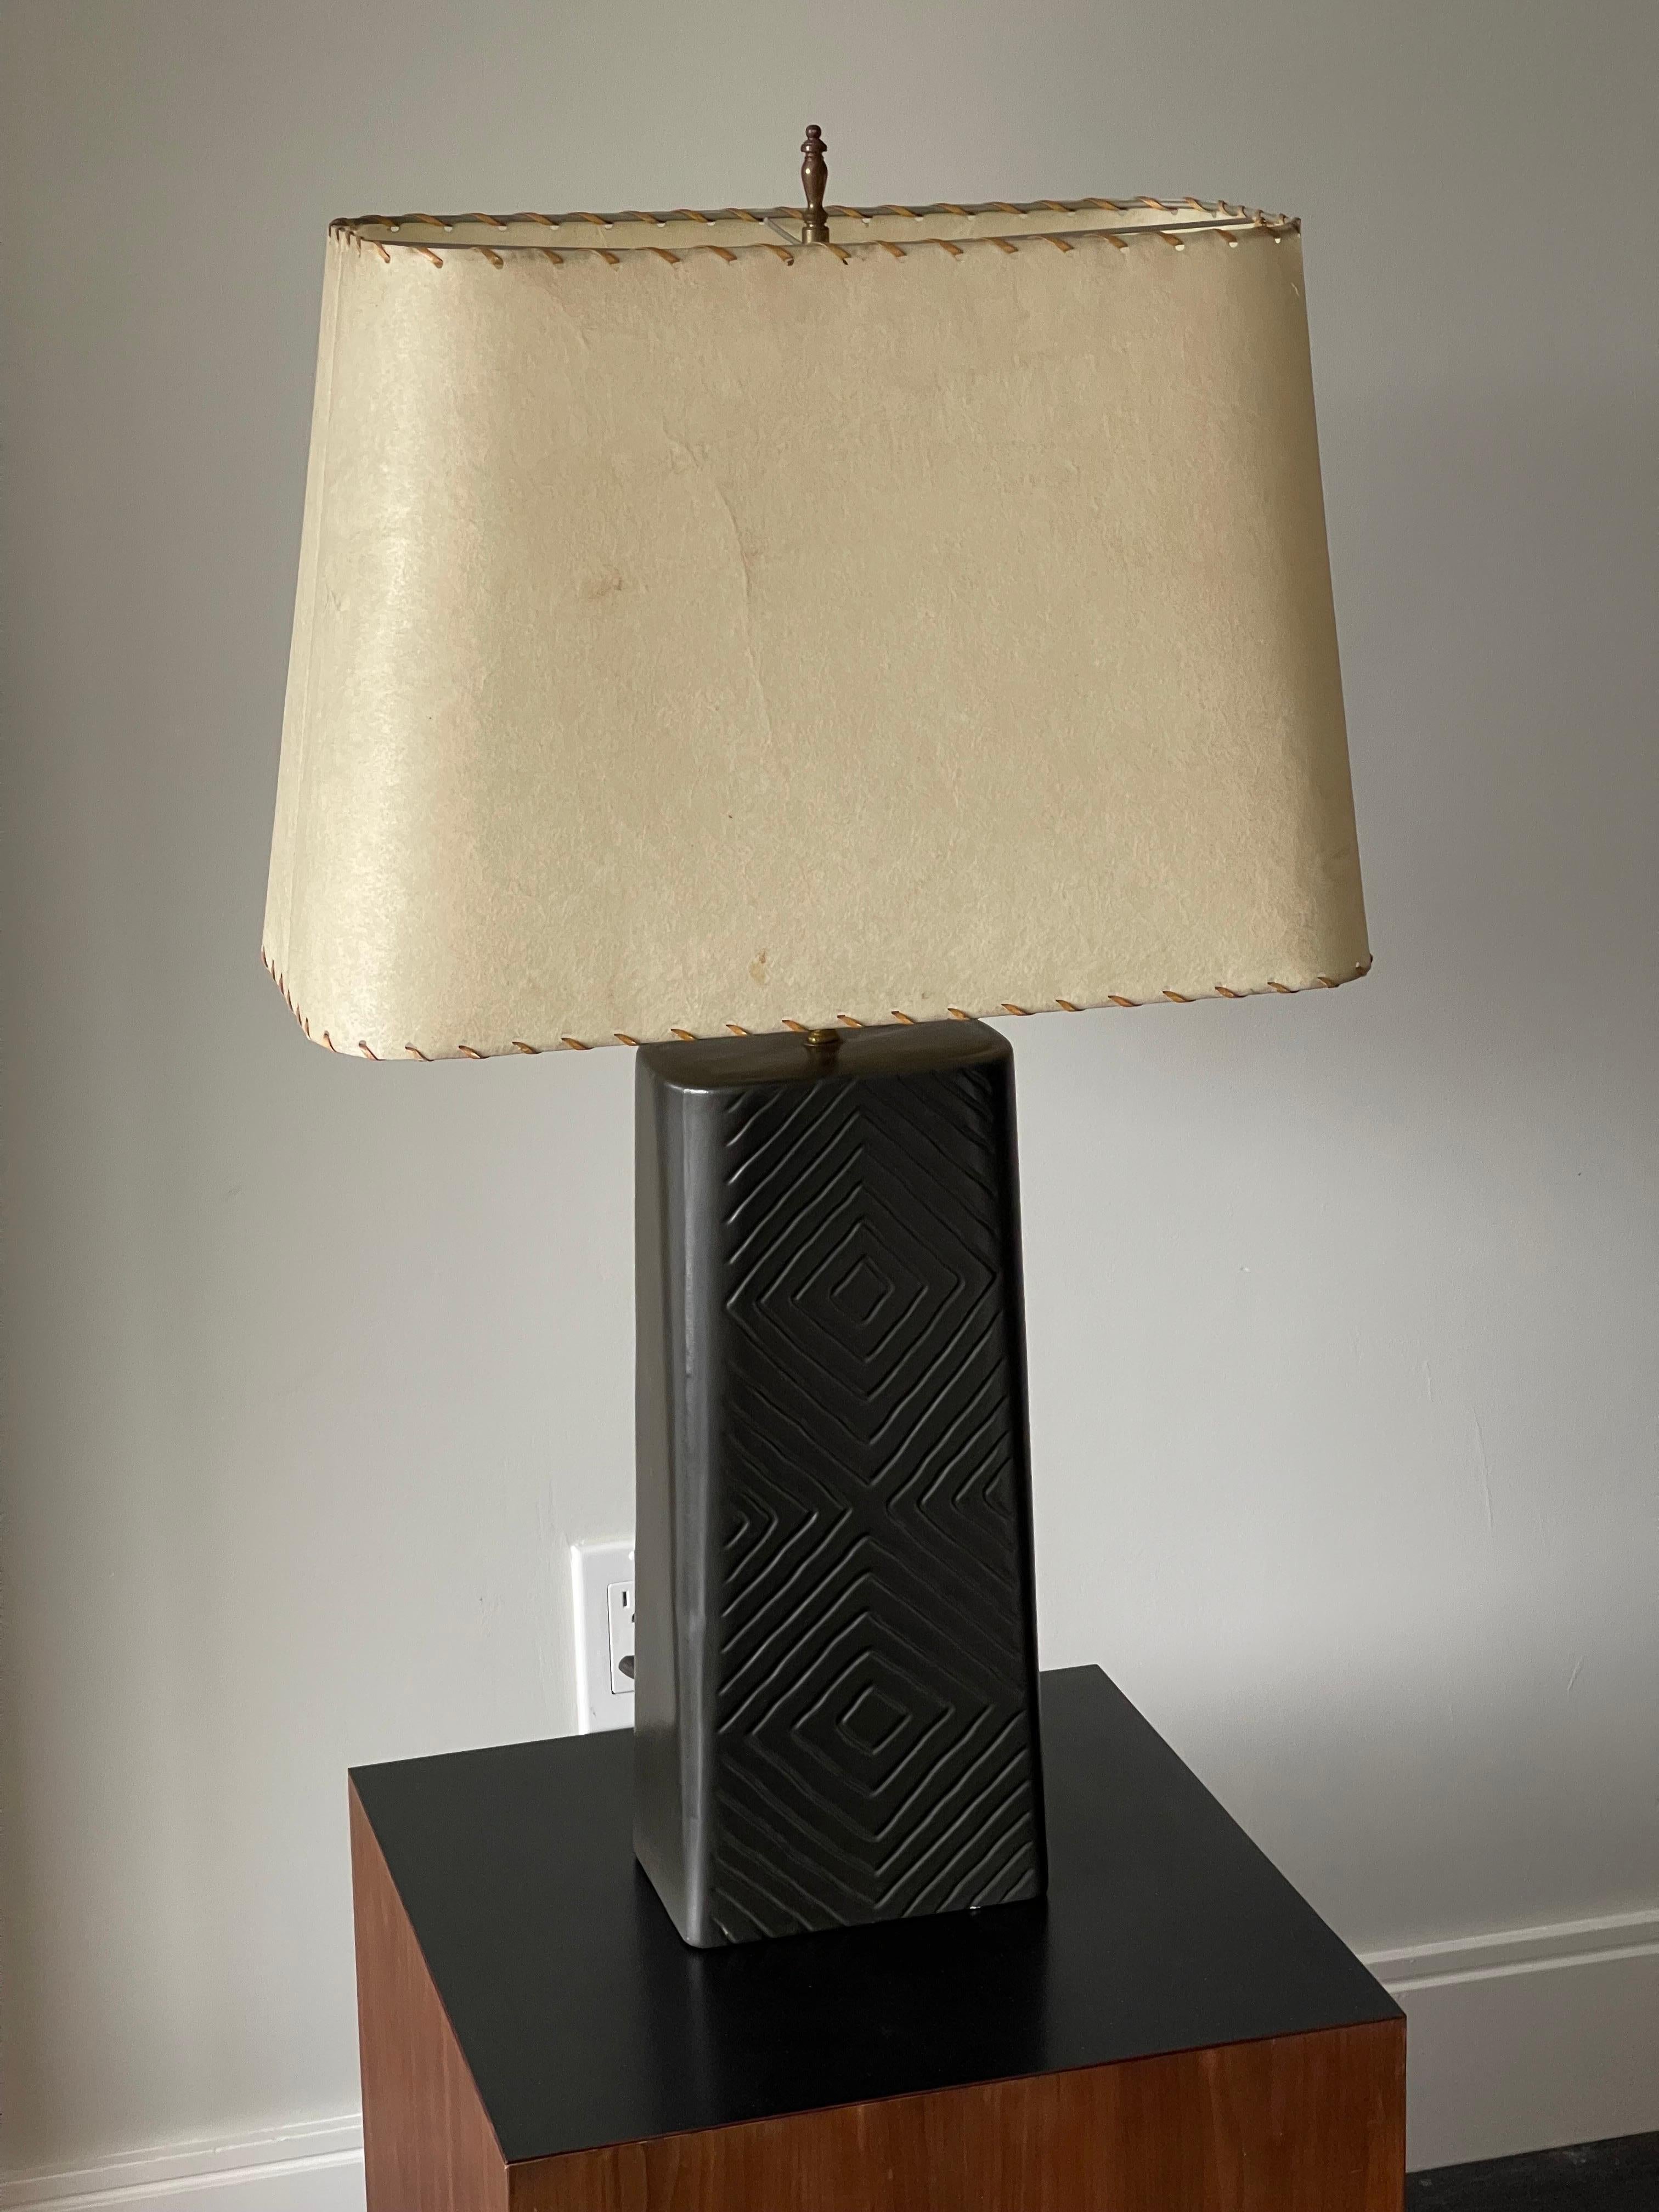 Large Mid-Century Modern Ceramic Table Lamp with Original Shade  For Sale 11